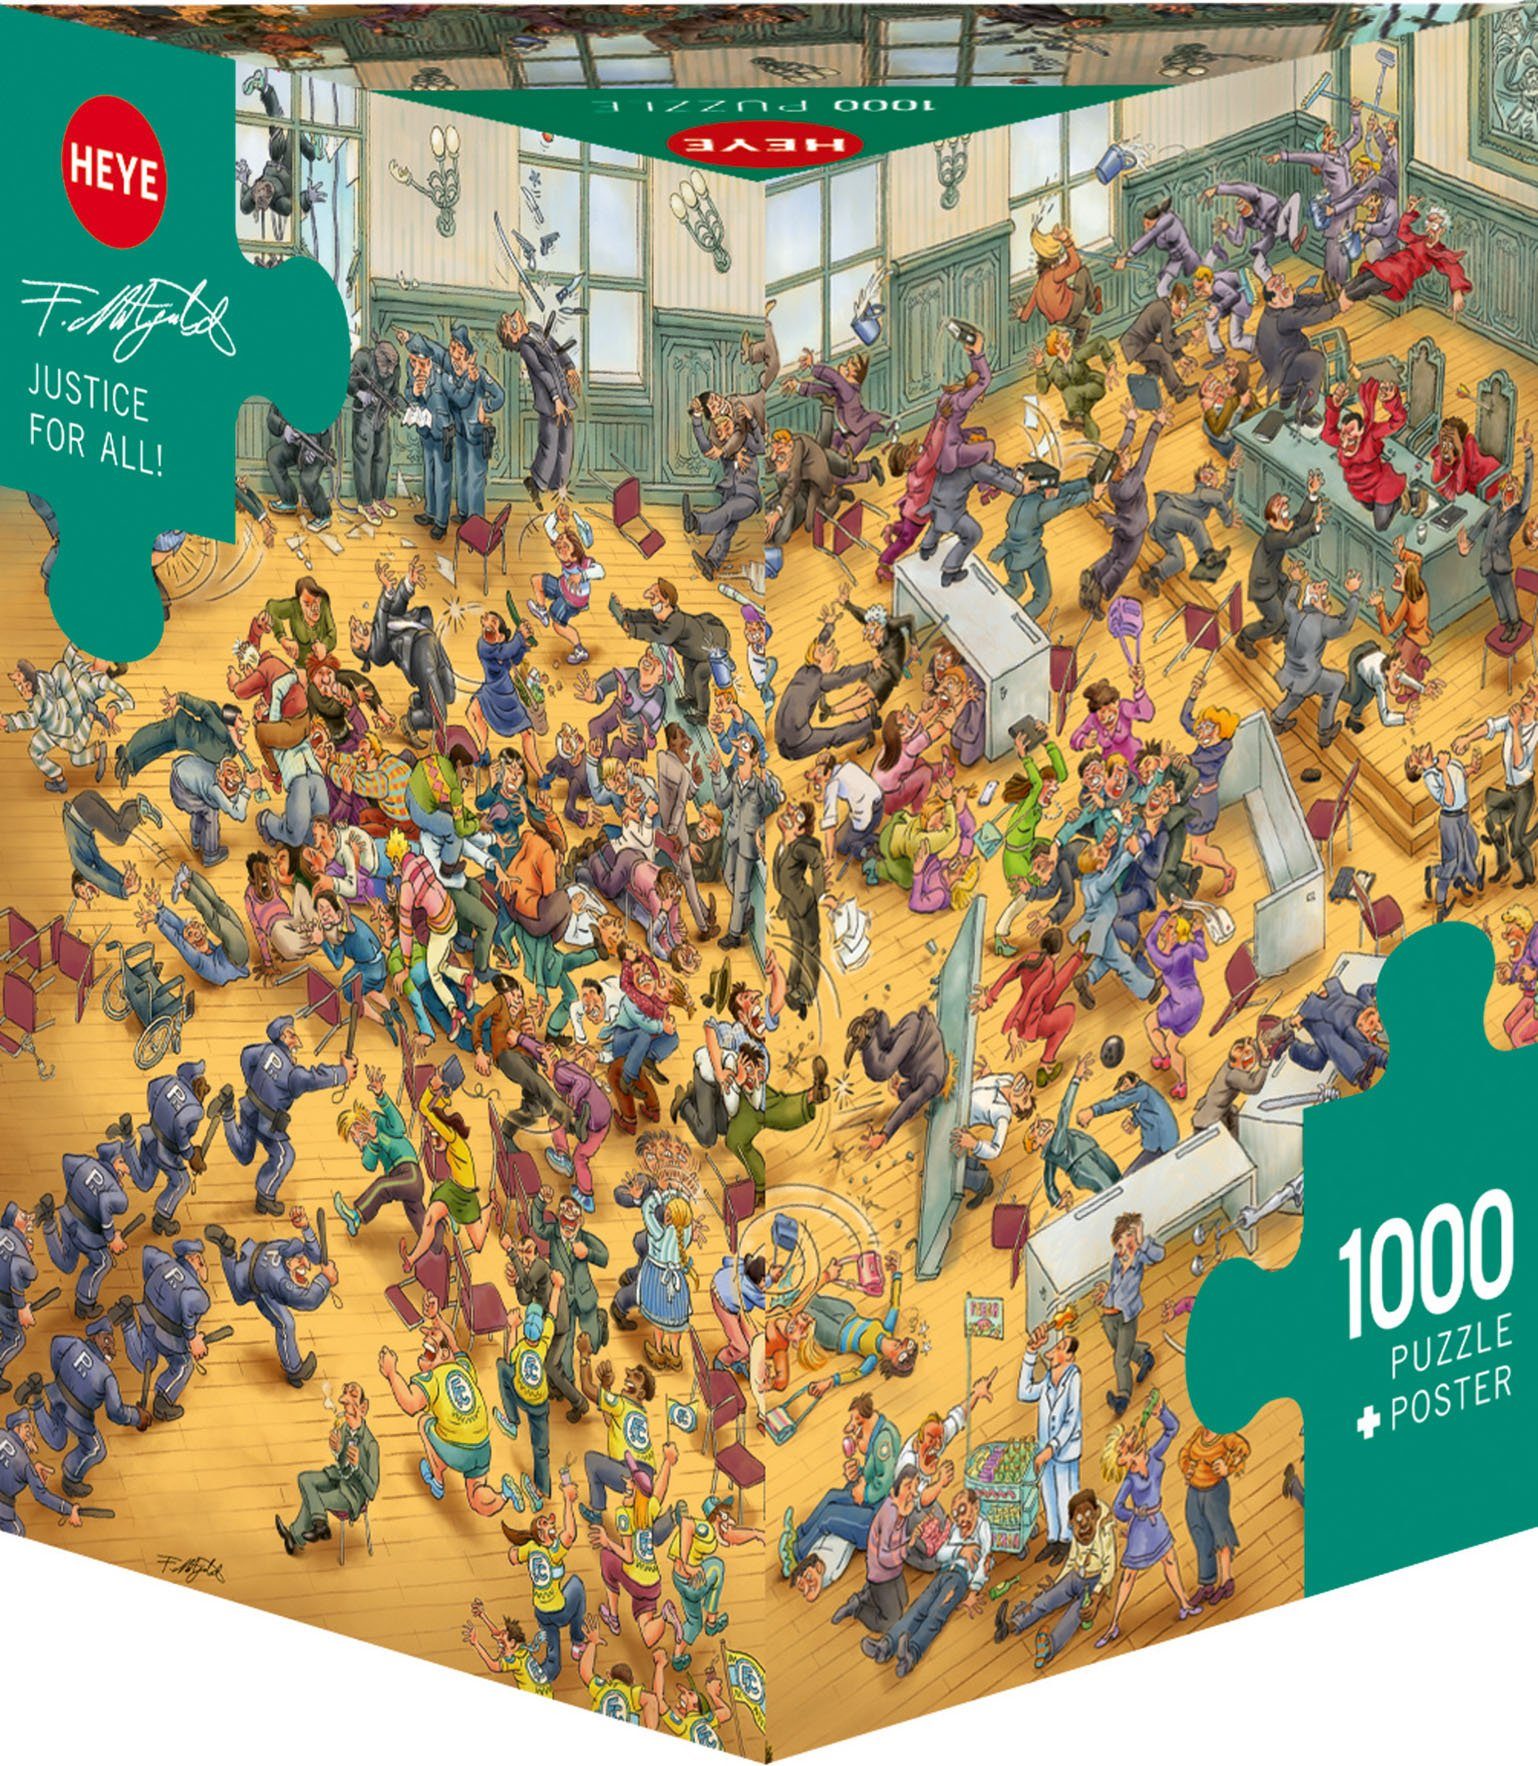 1000 Puzzle in Europe Made Mitgutsch, HEYE All! Justice Puzzleteile, For